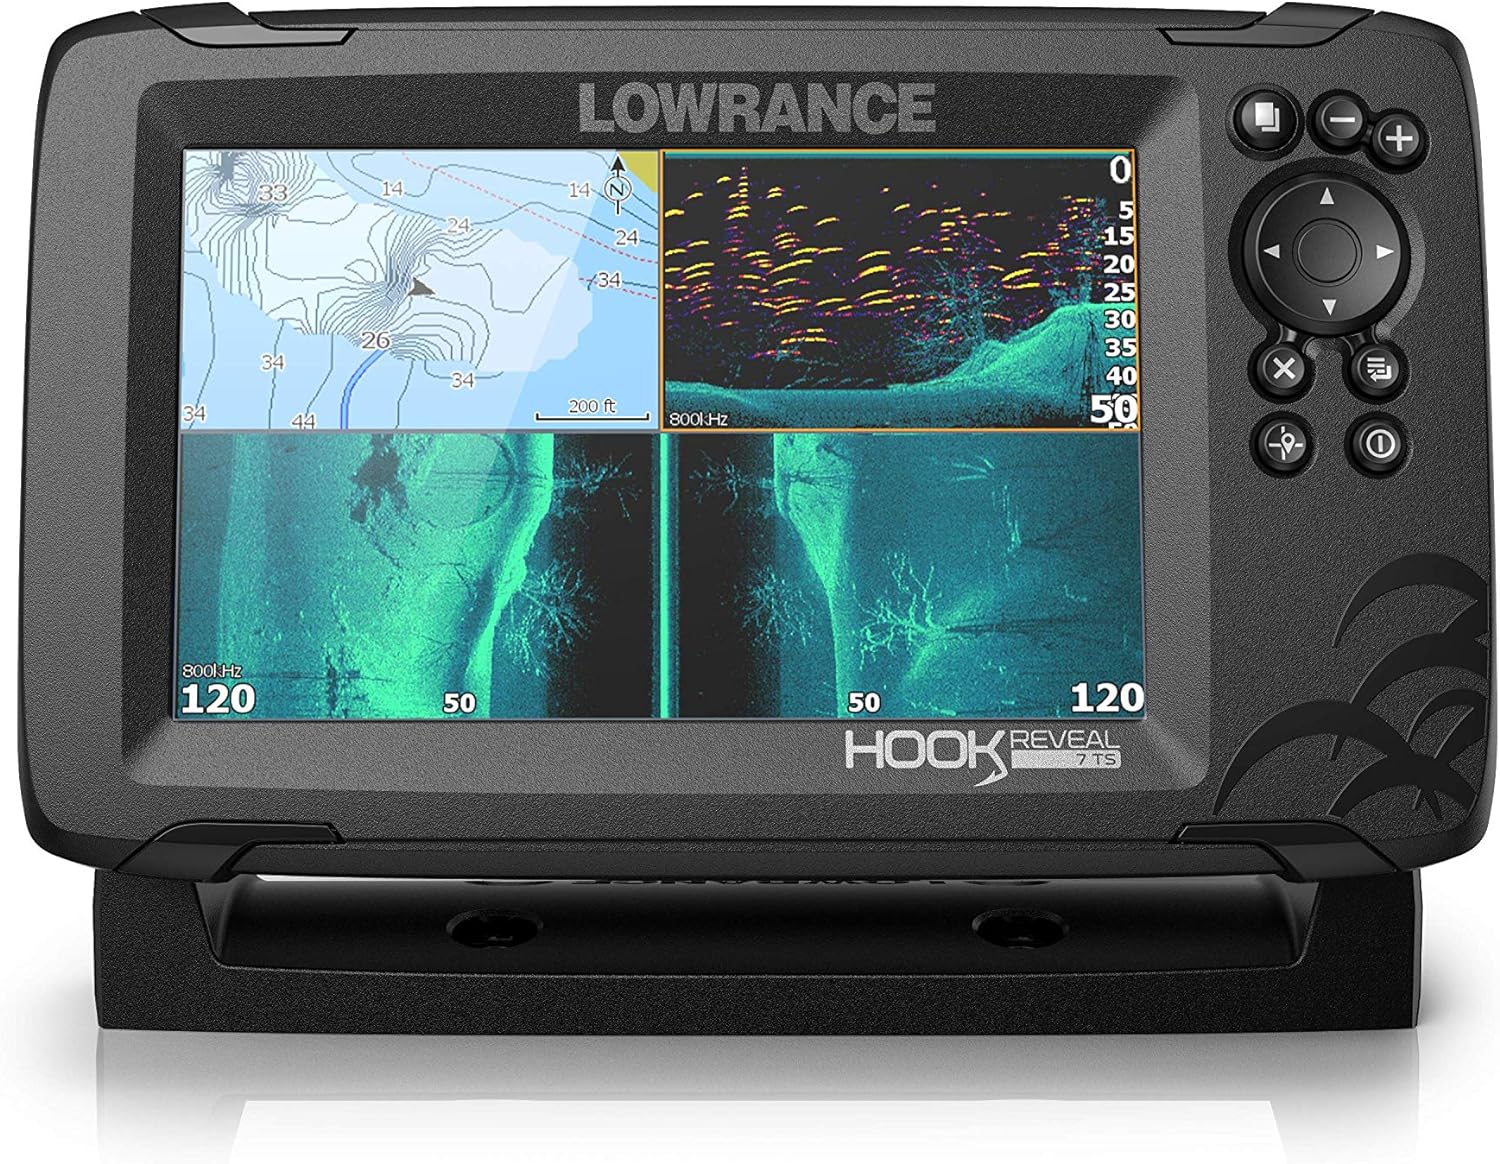 Lowrance Hook Reveal 7 Inch Fish Finders with Transducer, Plus Optional Preloaded Maps - Lowrance Hook Reveal 7 Inch Fish Finders Review